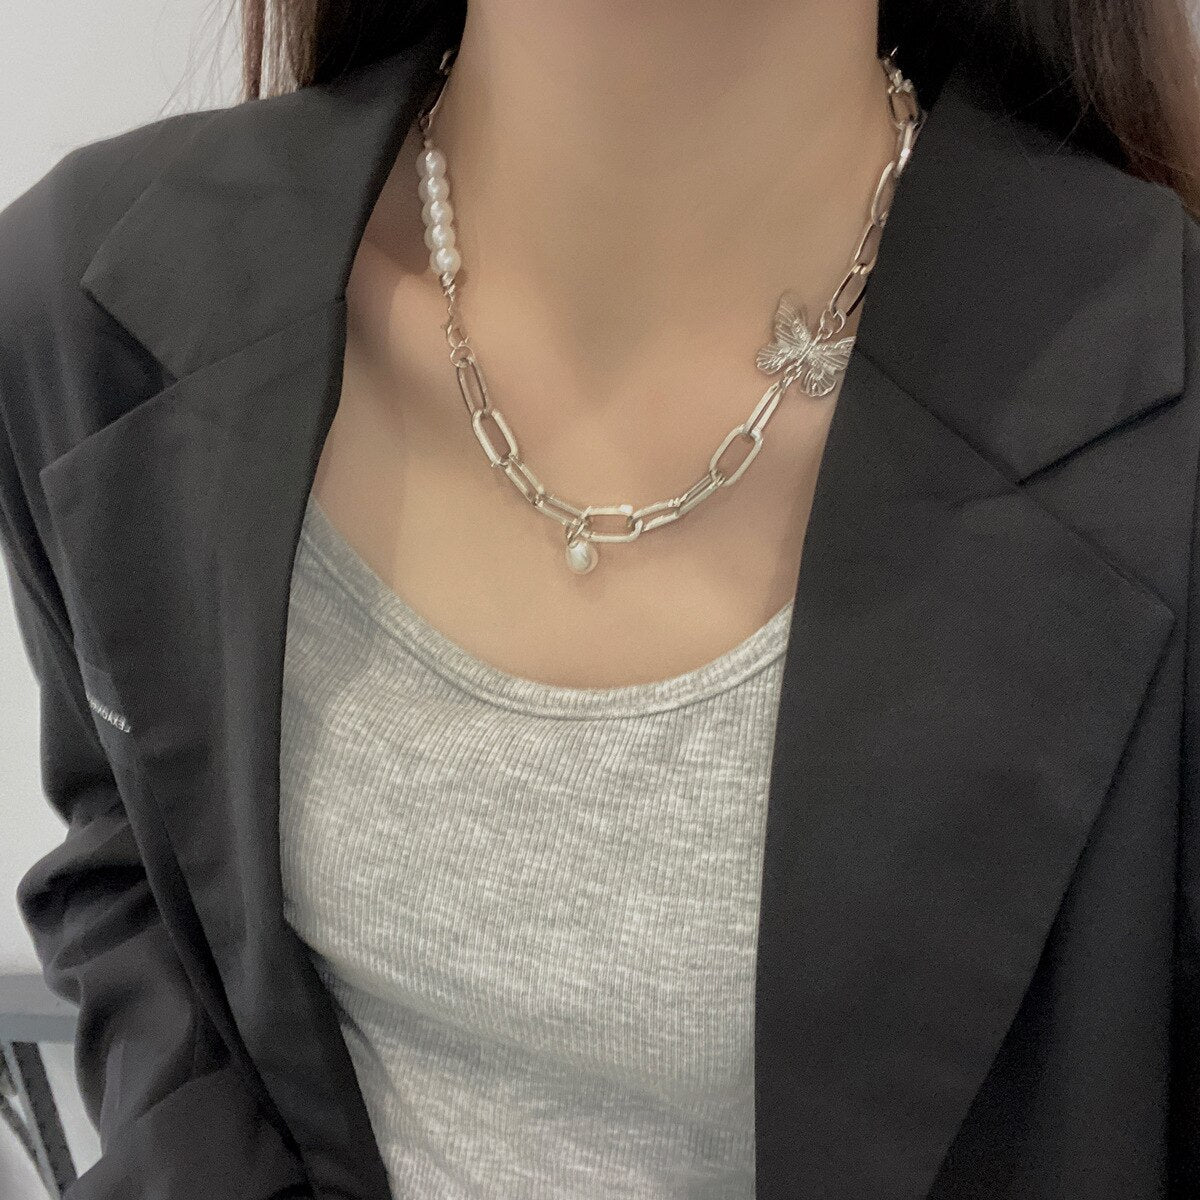 Elliptic Chain Necklace with Mock Pearl and Butterfly Pendant - nightcity clothing